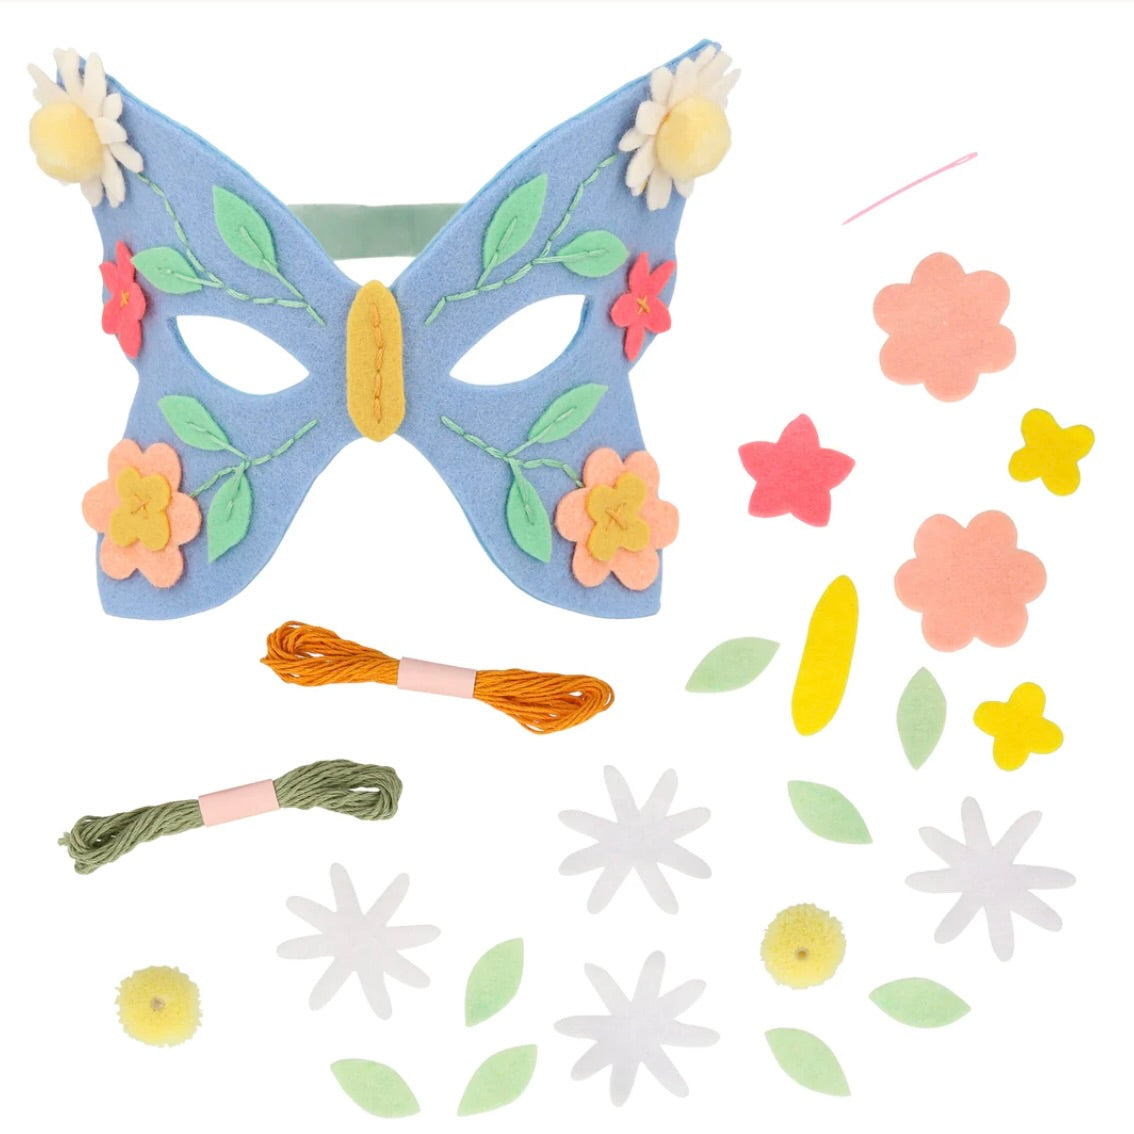 Flower Embroidery Butterfly Mask Kit